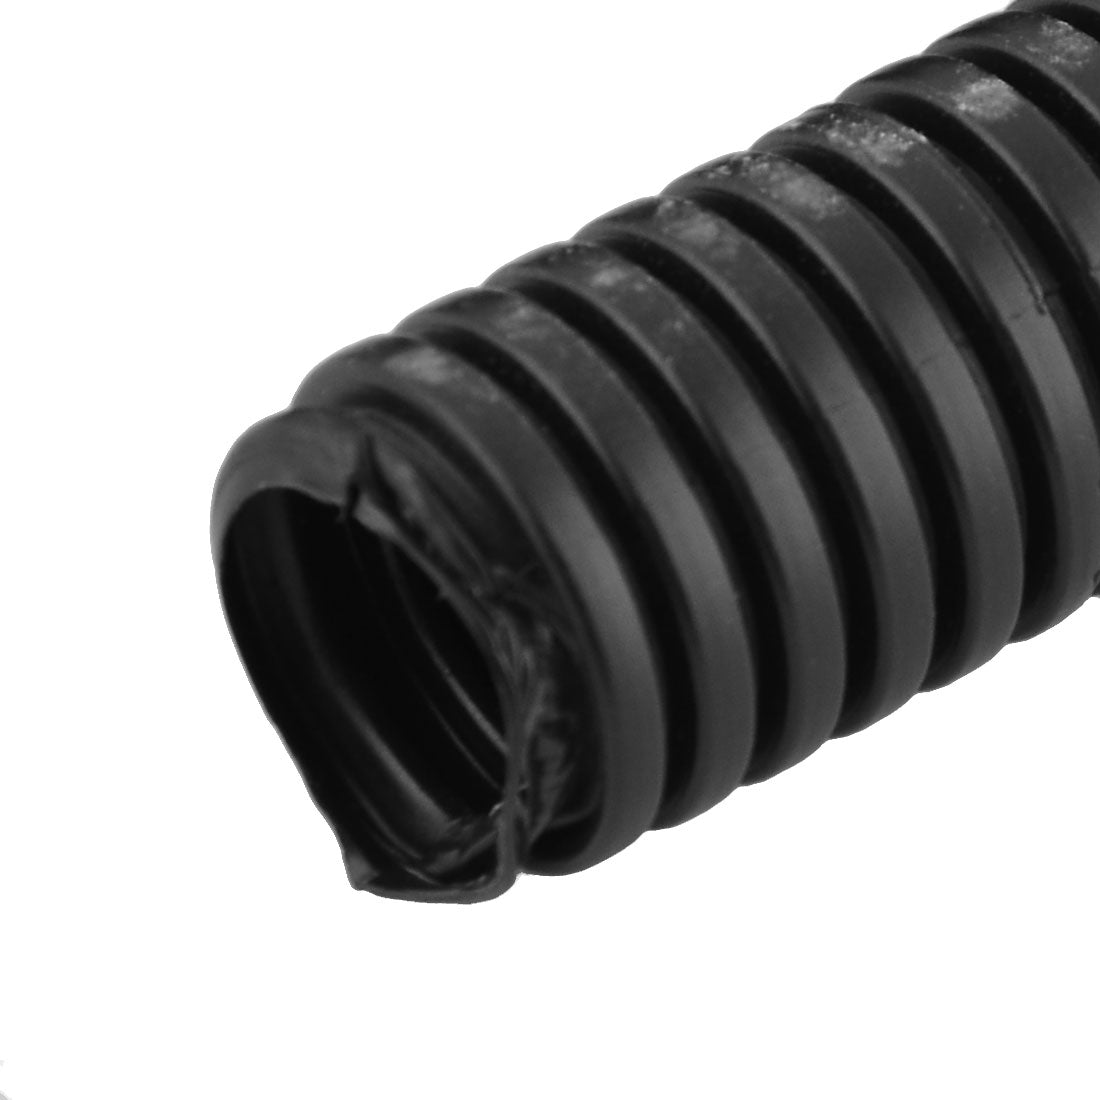 uxcell Uxcell 1.85 M 15 x 18 mm Plastic Corrugated Conduit Tube for Garden,Office Black